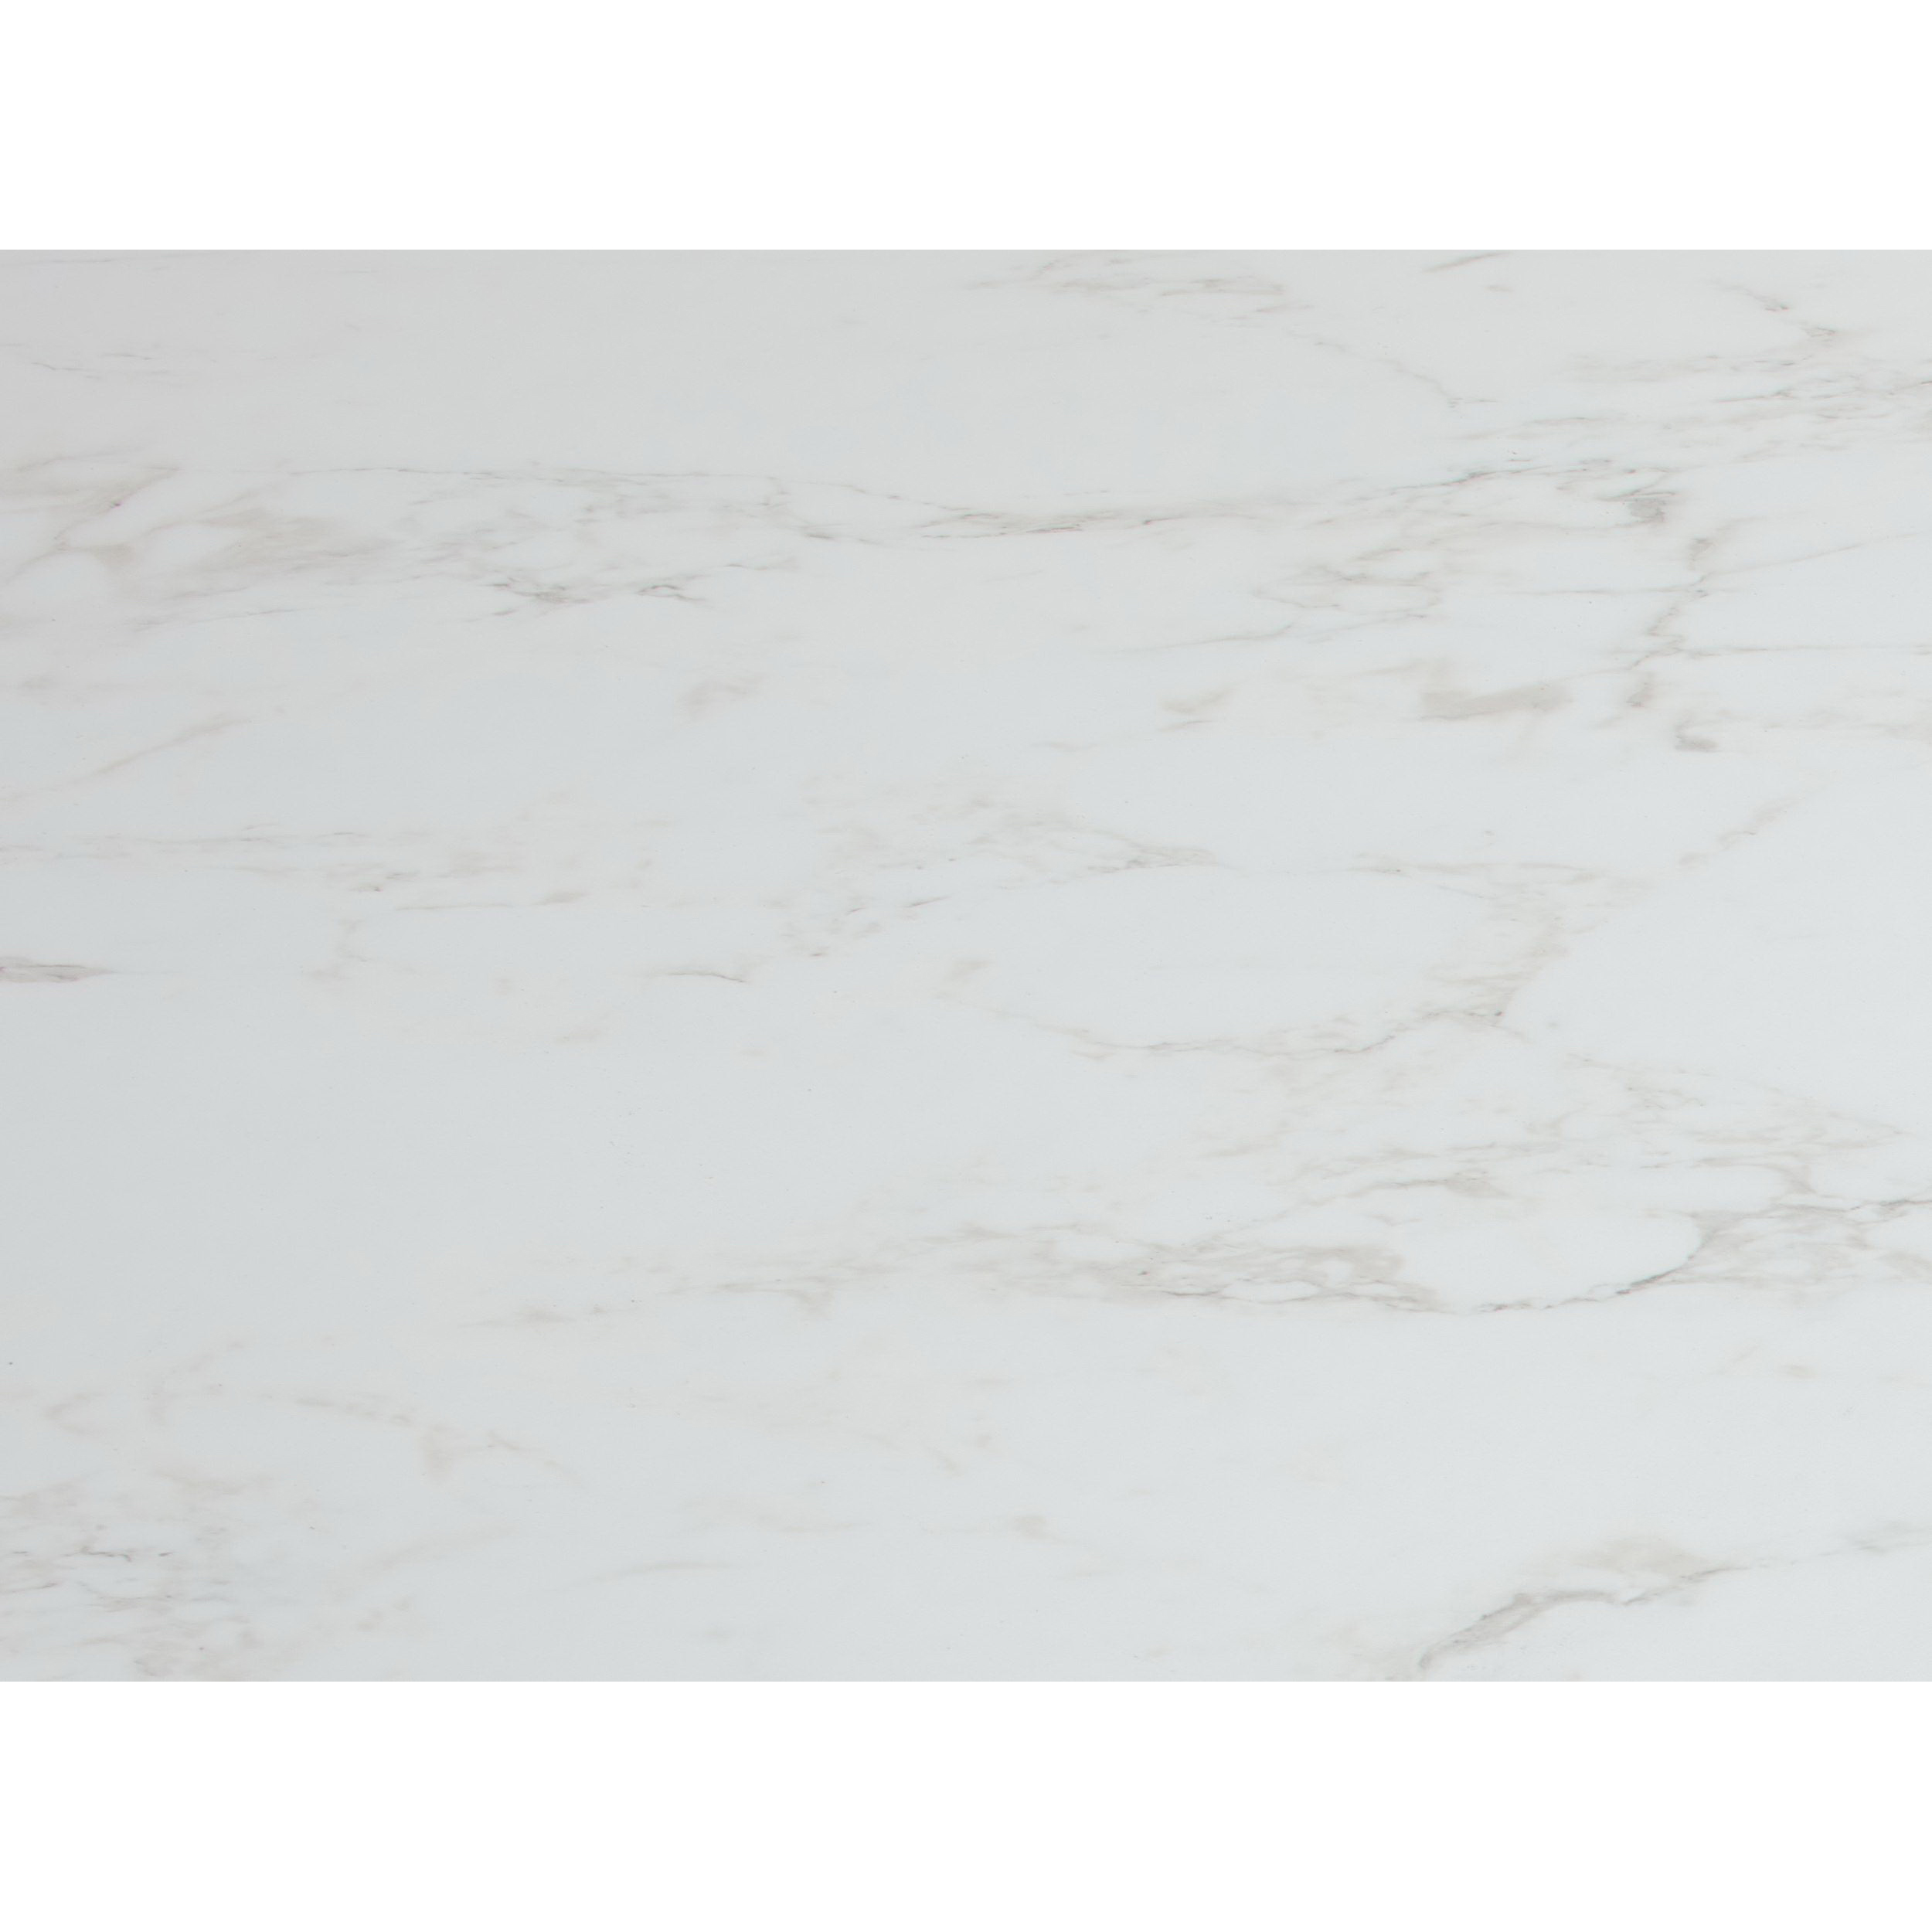 Stretta 83181 Countertop, 6 ft L, 25 in D, 1-1/8 in Thick, White Marble, Sleek Edge